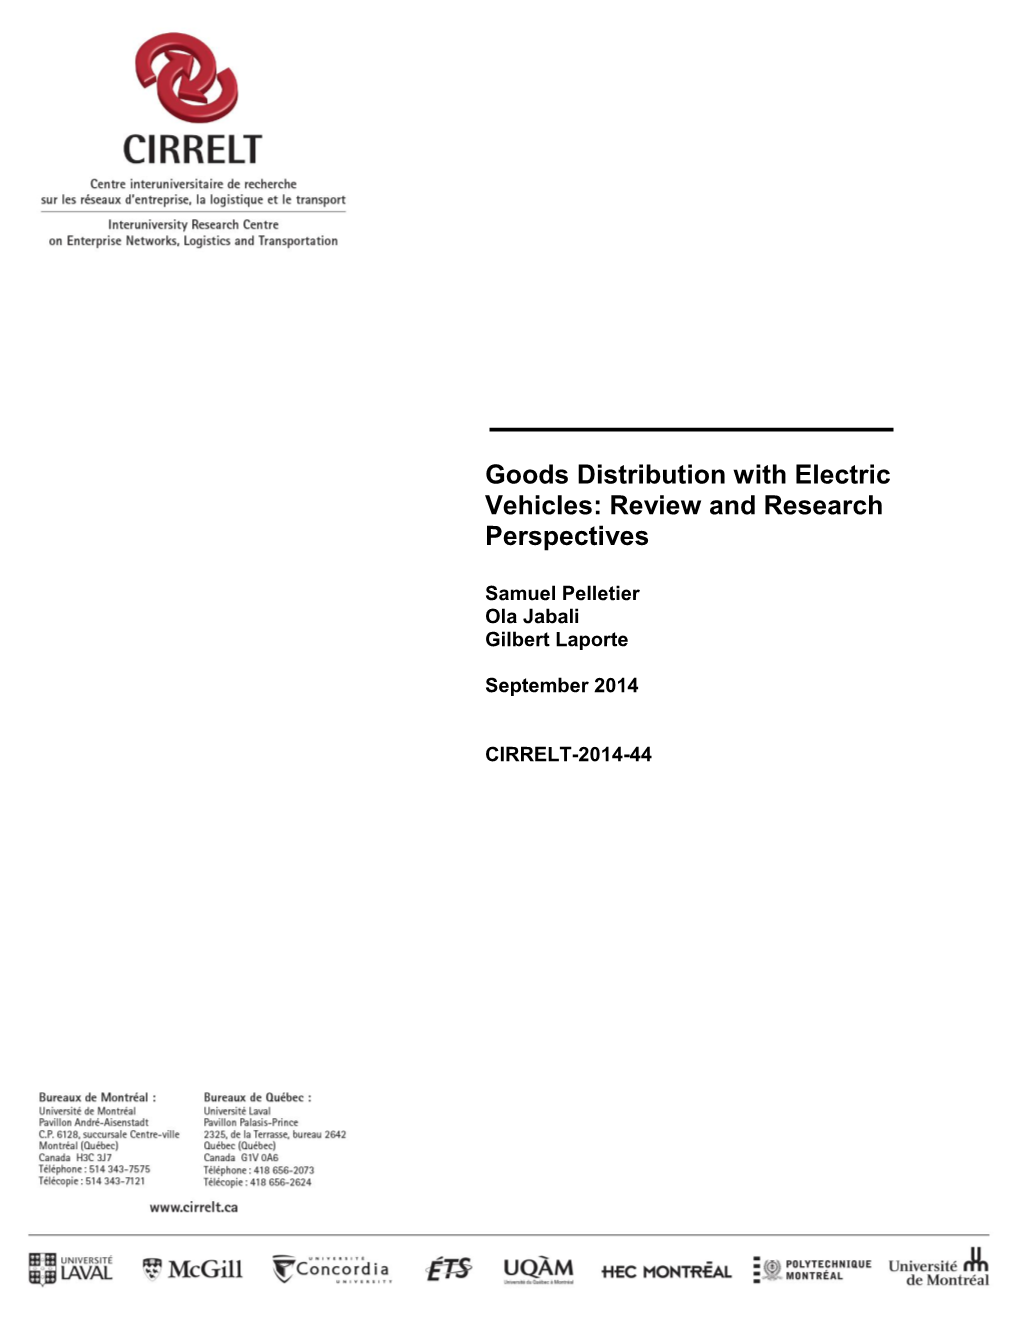 Goods Distribution with Electric Vehicles: Review and Research Perspectives